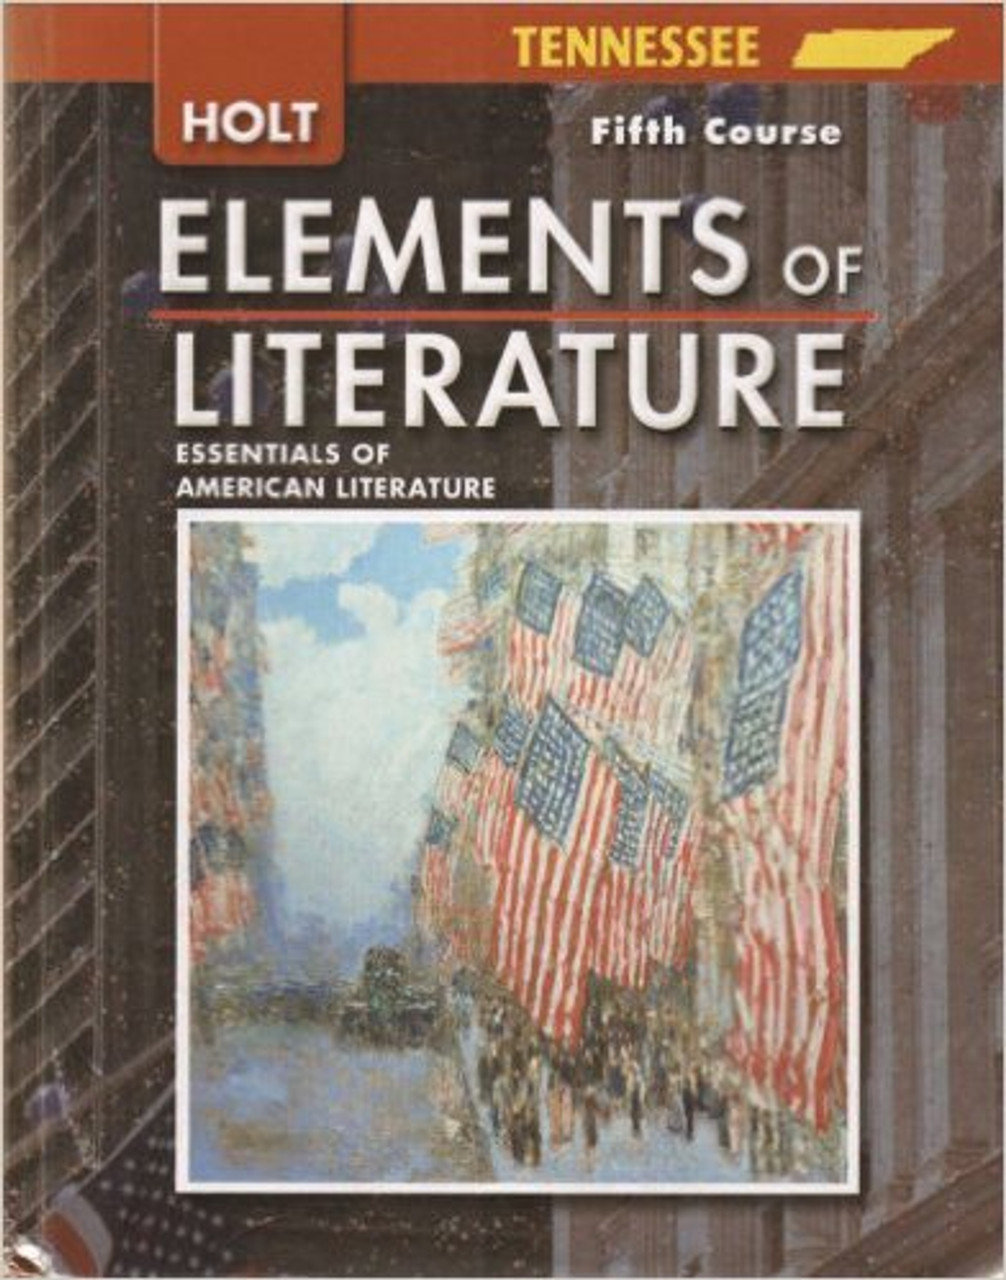 Student　Edition　Tennessee:　Fifth　Elements　Elements　Holt　Literature　2007　BookPal　of　Literature　of　Course